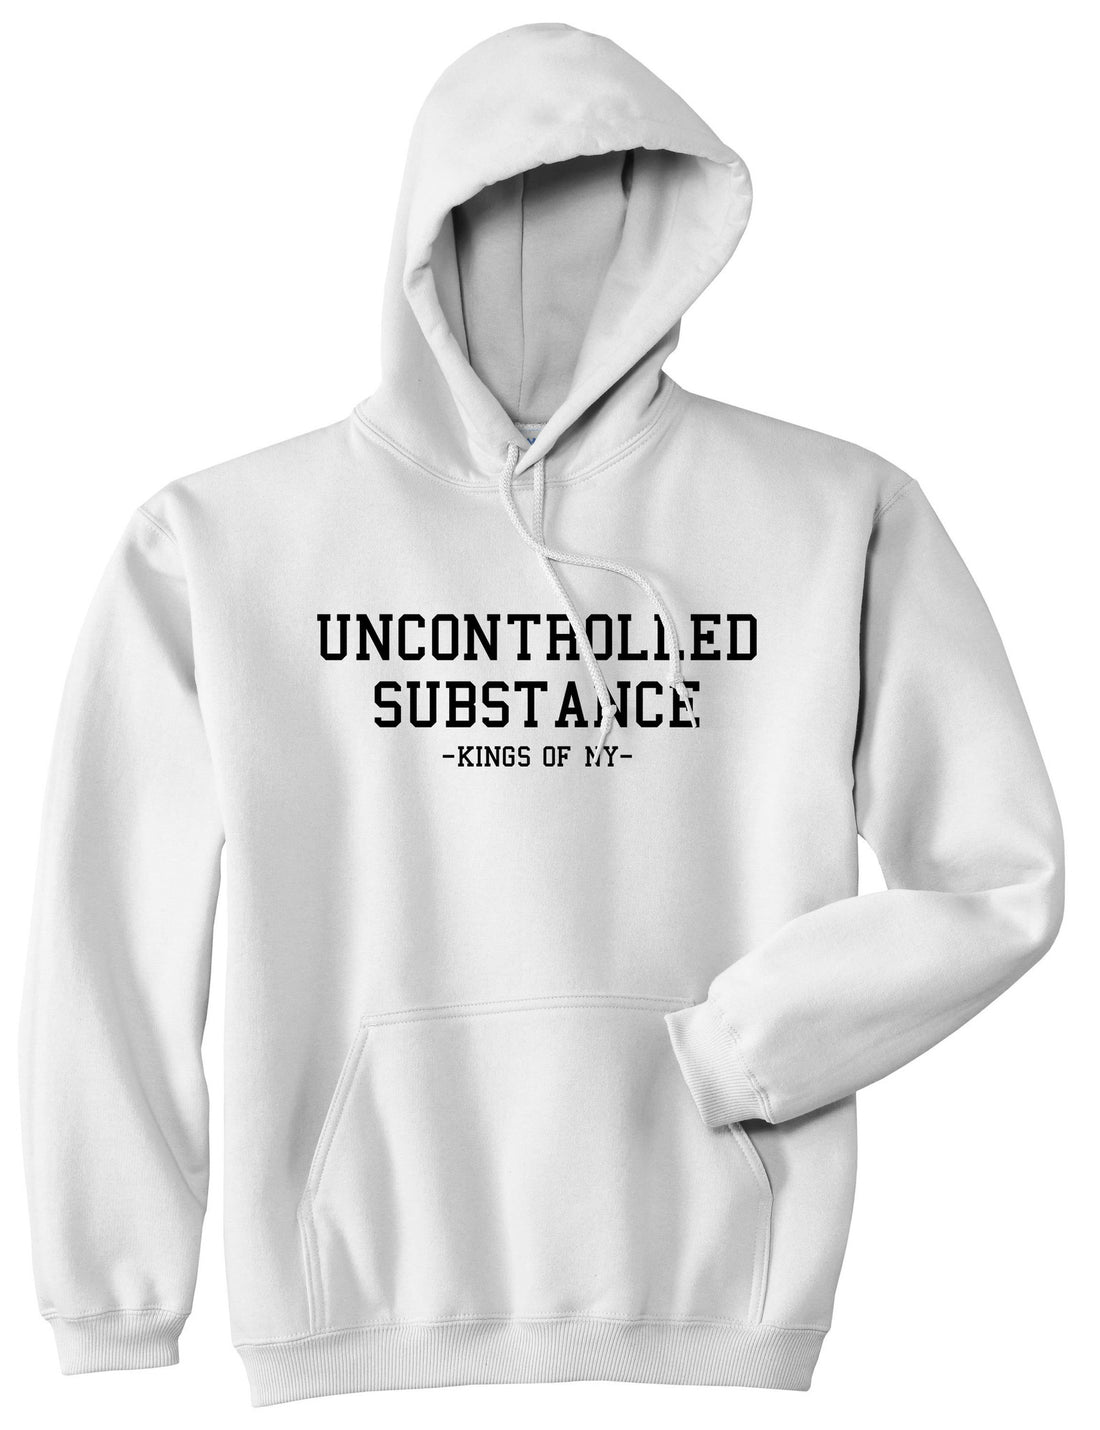 Uncontrolled Substance Pullover Hoodie Hoody in White by Kings Of NY